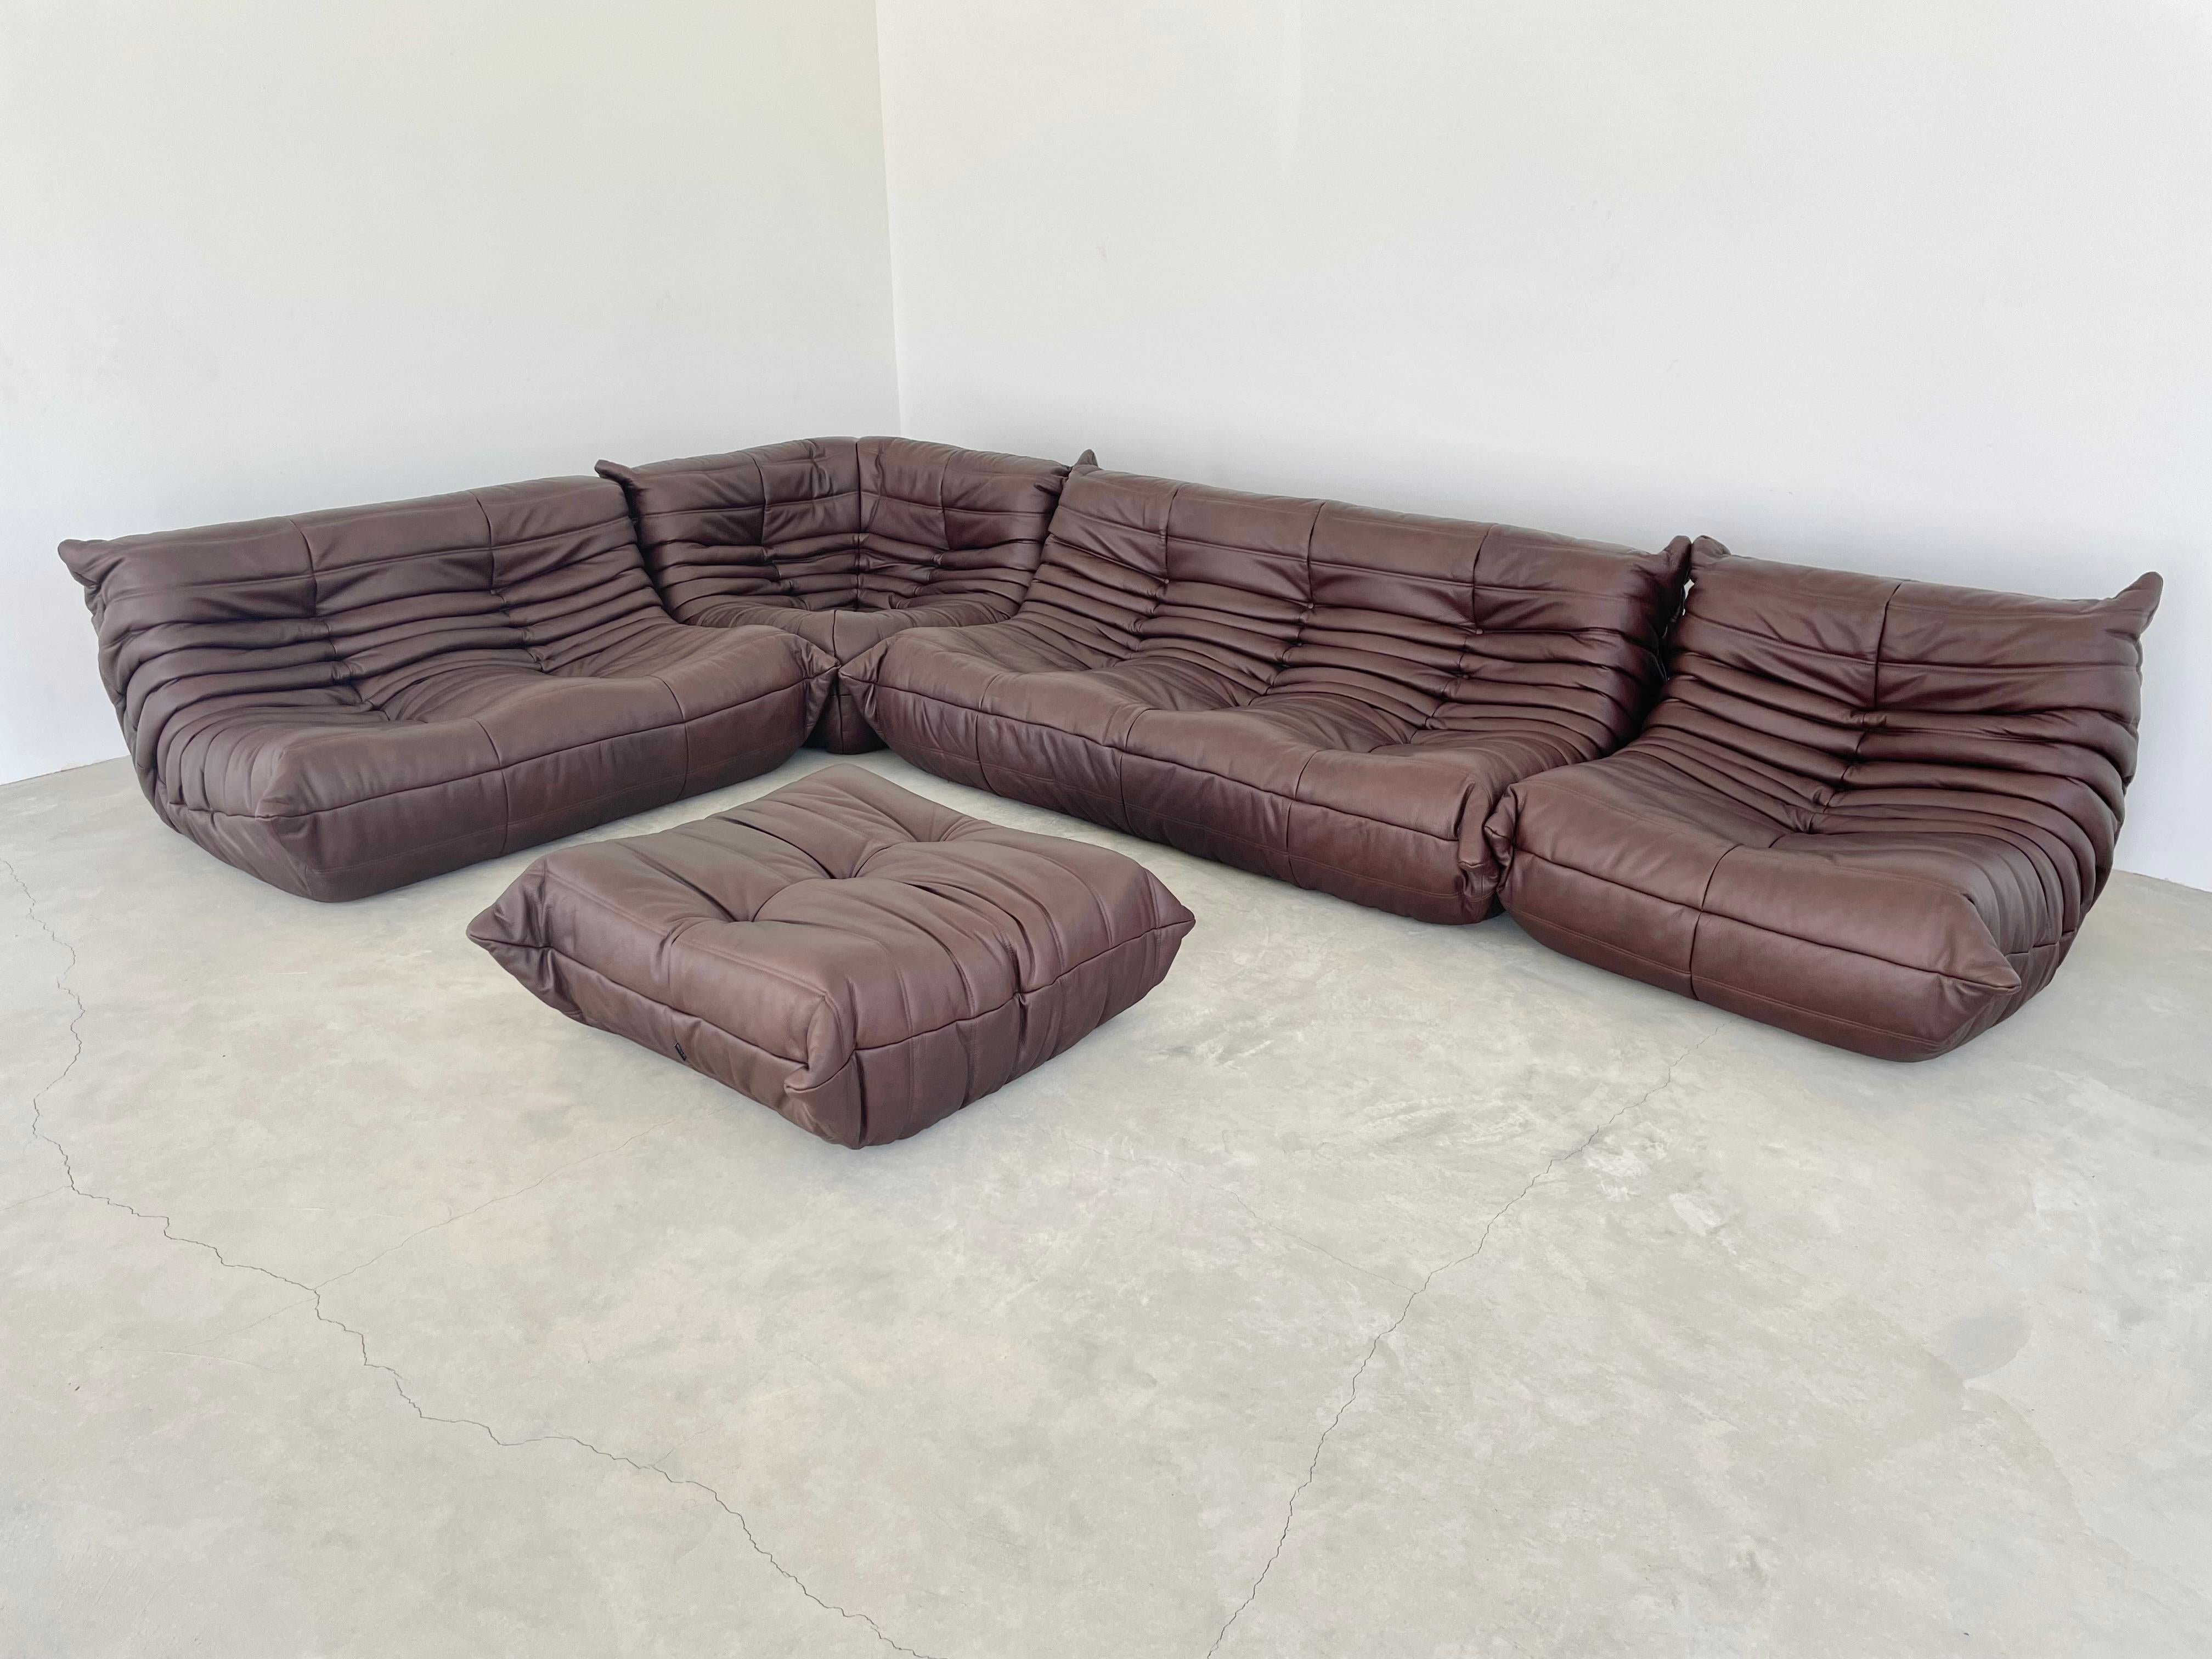 Classic French Togo set by Michel Ducaroy for luxury brand Ligne Roset. Originally designed in the 1970s the iconic togo sofa is now a design classic. This set comes in it's original chocolate brown leather.

Timeless comfort and style make this